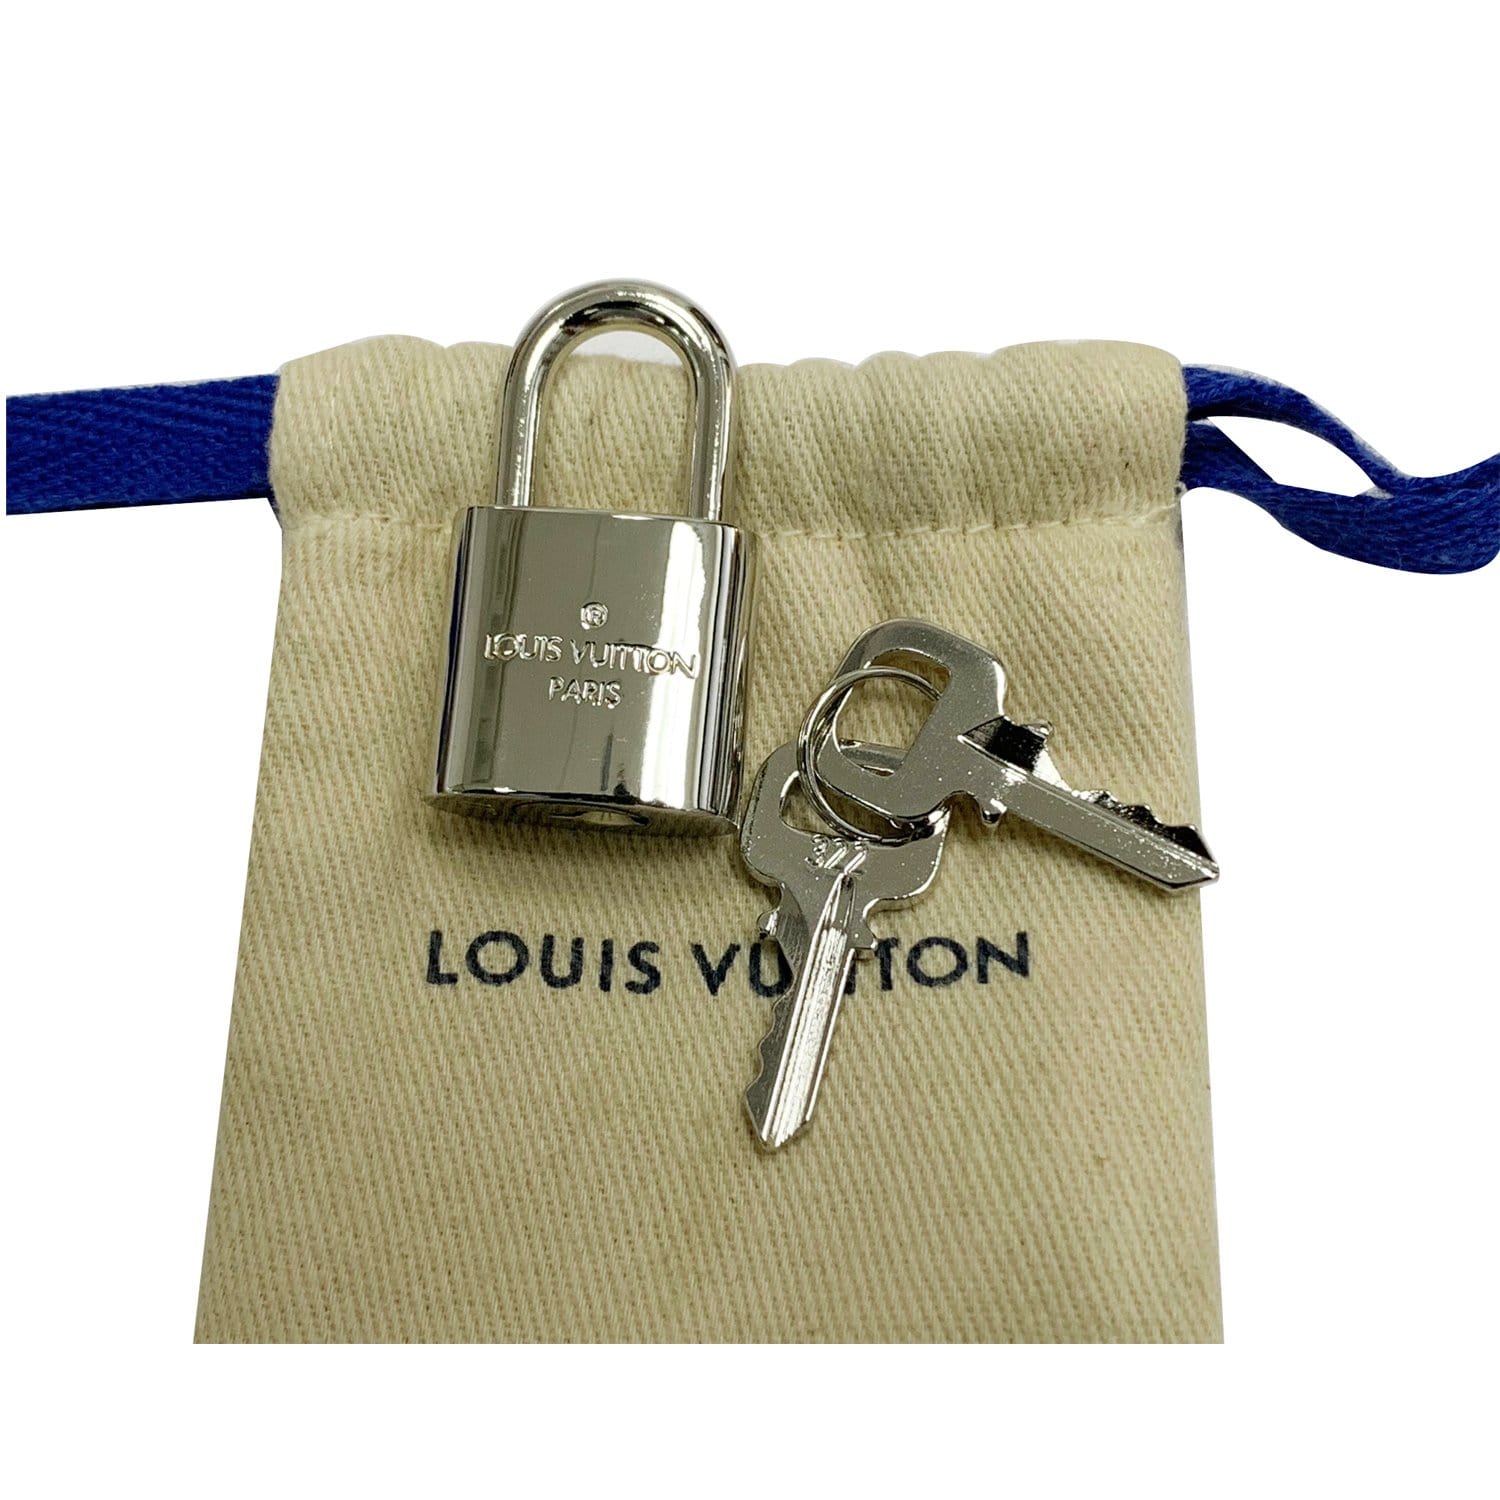 louis vuitton bag with lv lock